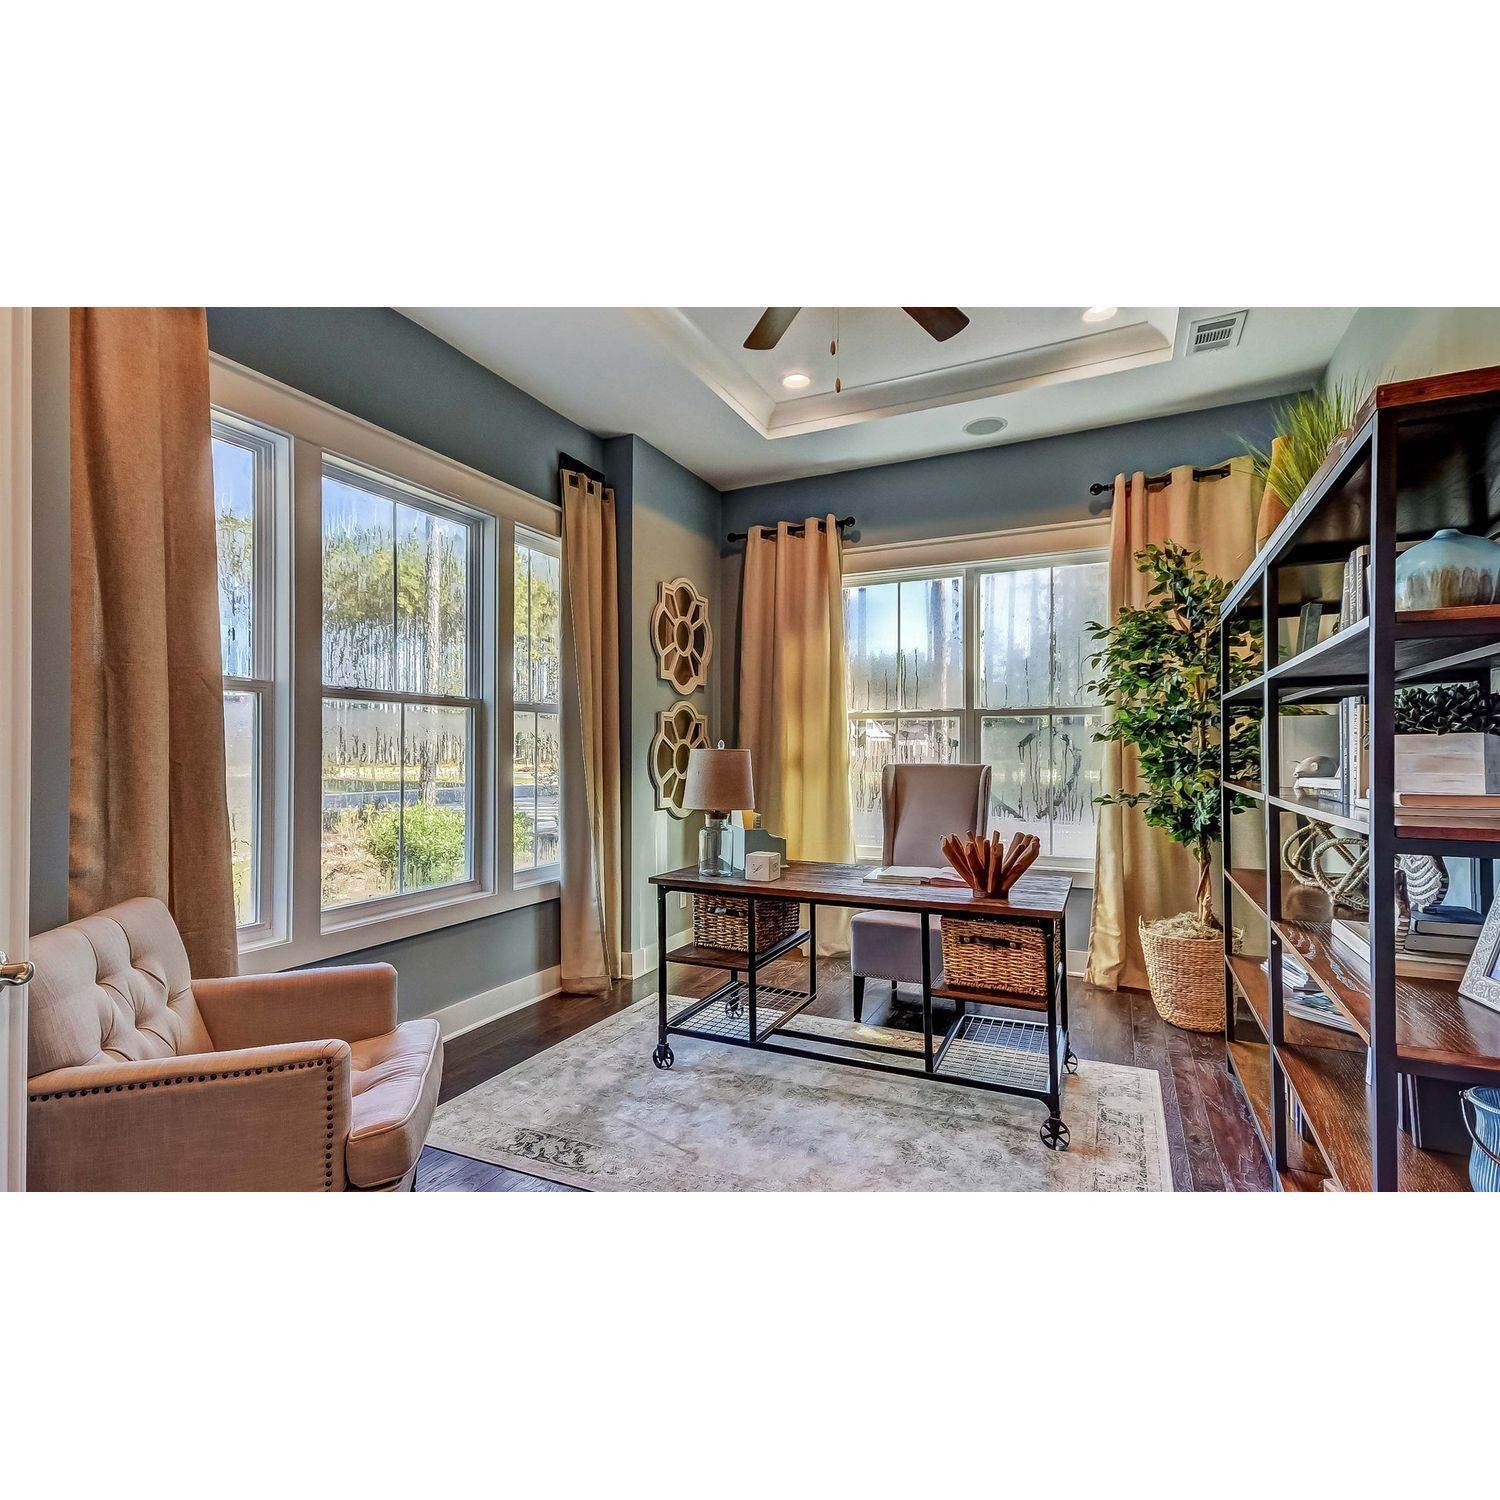 23. Single Family for Sale at K. Hovnanian's® Four Seasons At Kent Island - Sing 203 Bayberry Drive, Chester, MD 21619